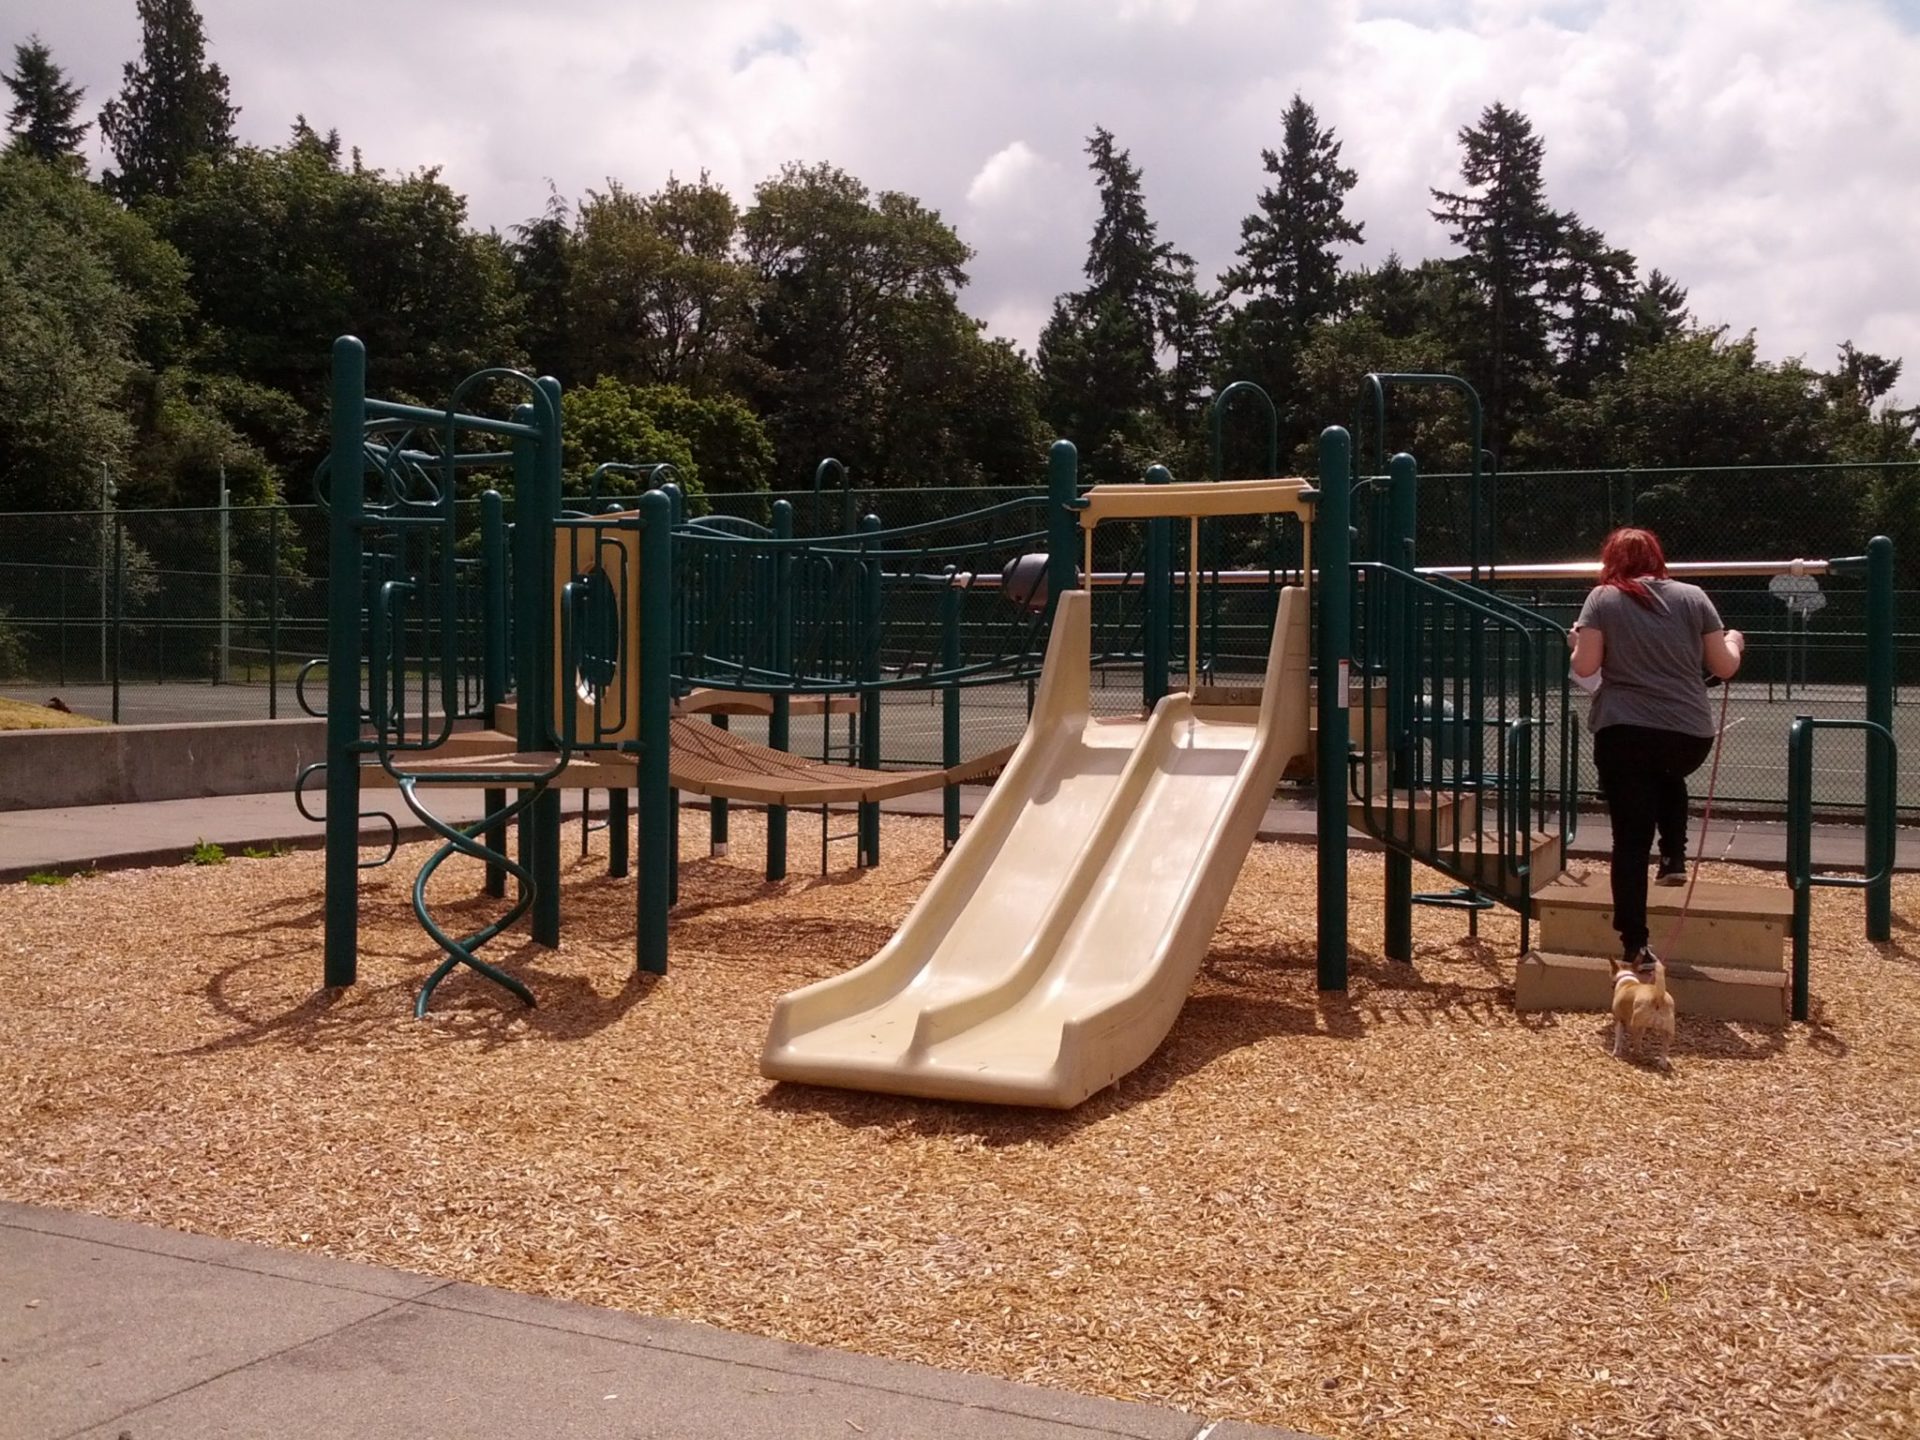 Things To Do in Kent: Climb, Slide and more at Garrison Creek Park